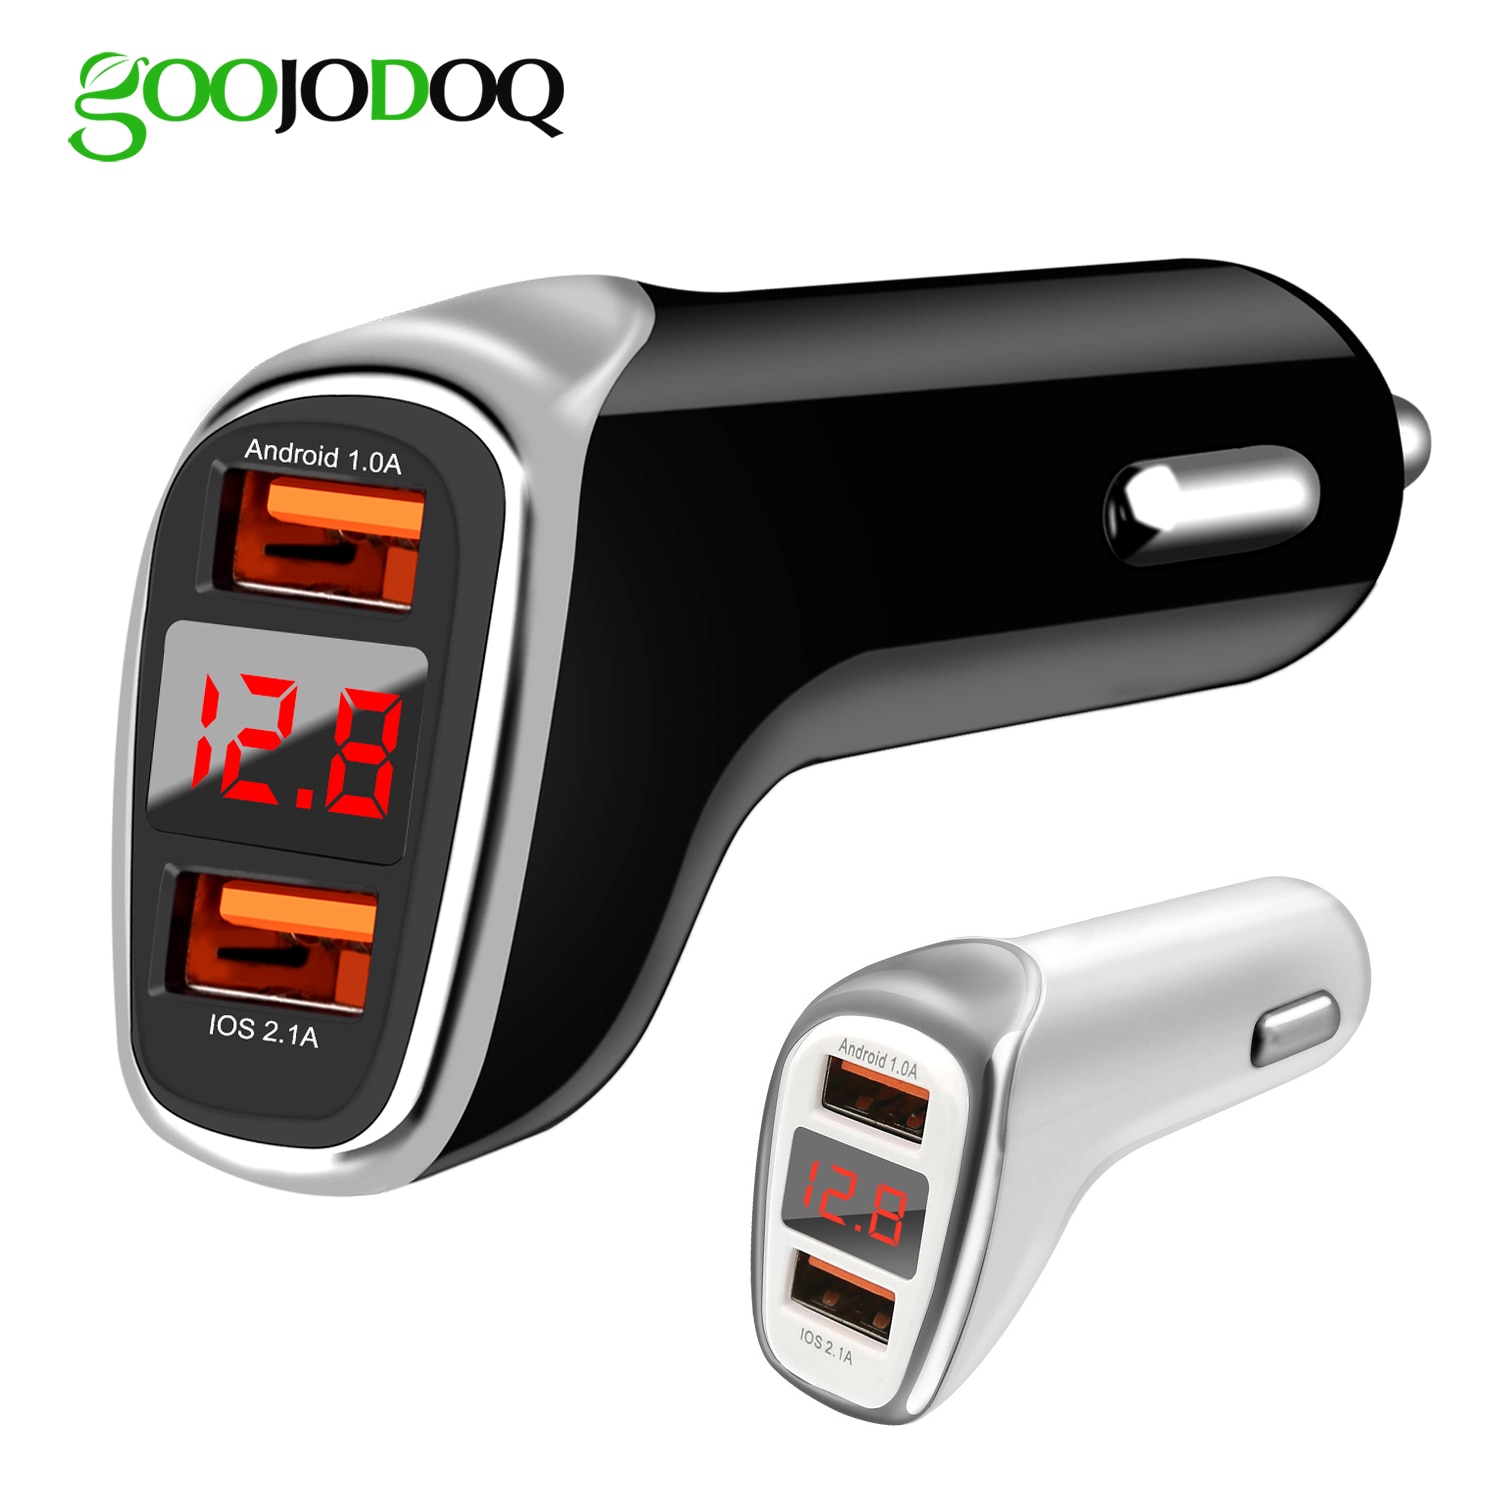 Dual USB Car charger quick charge 2.0 Mobiele Telefoon Laders USB Snelle Auto Opladen voor iPhone Samsung Xiaomi HTC